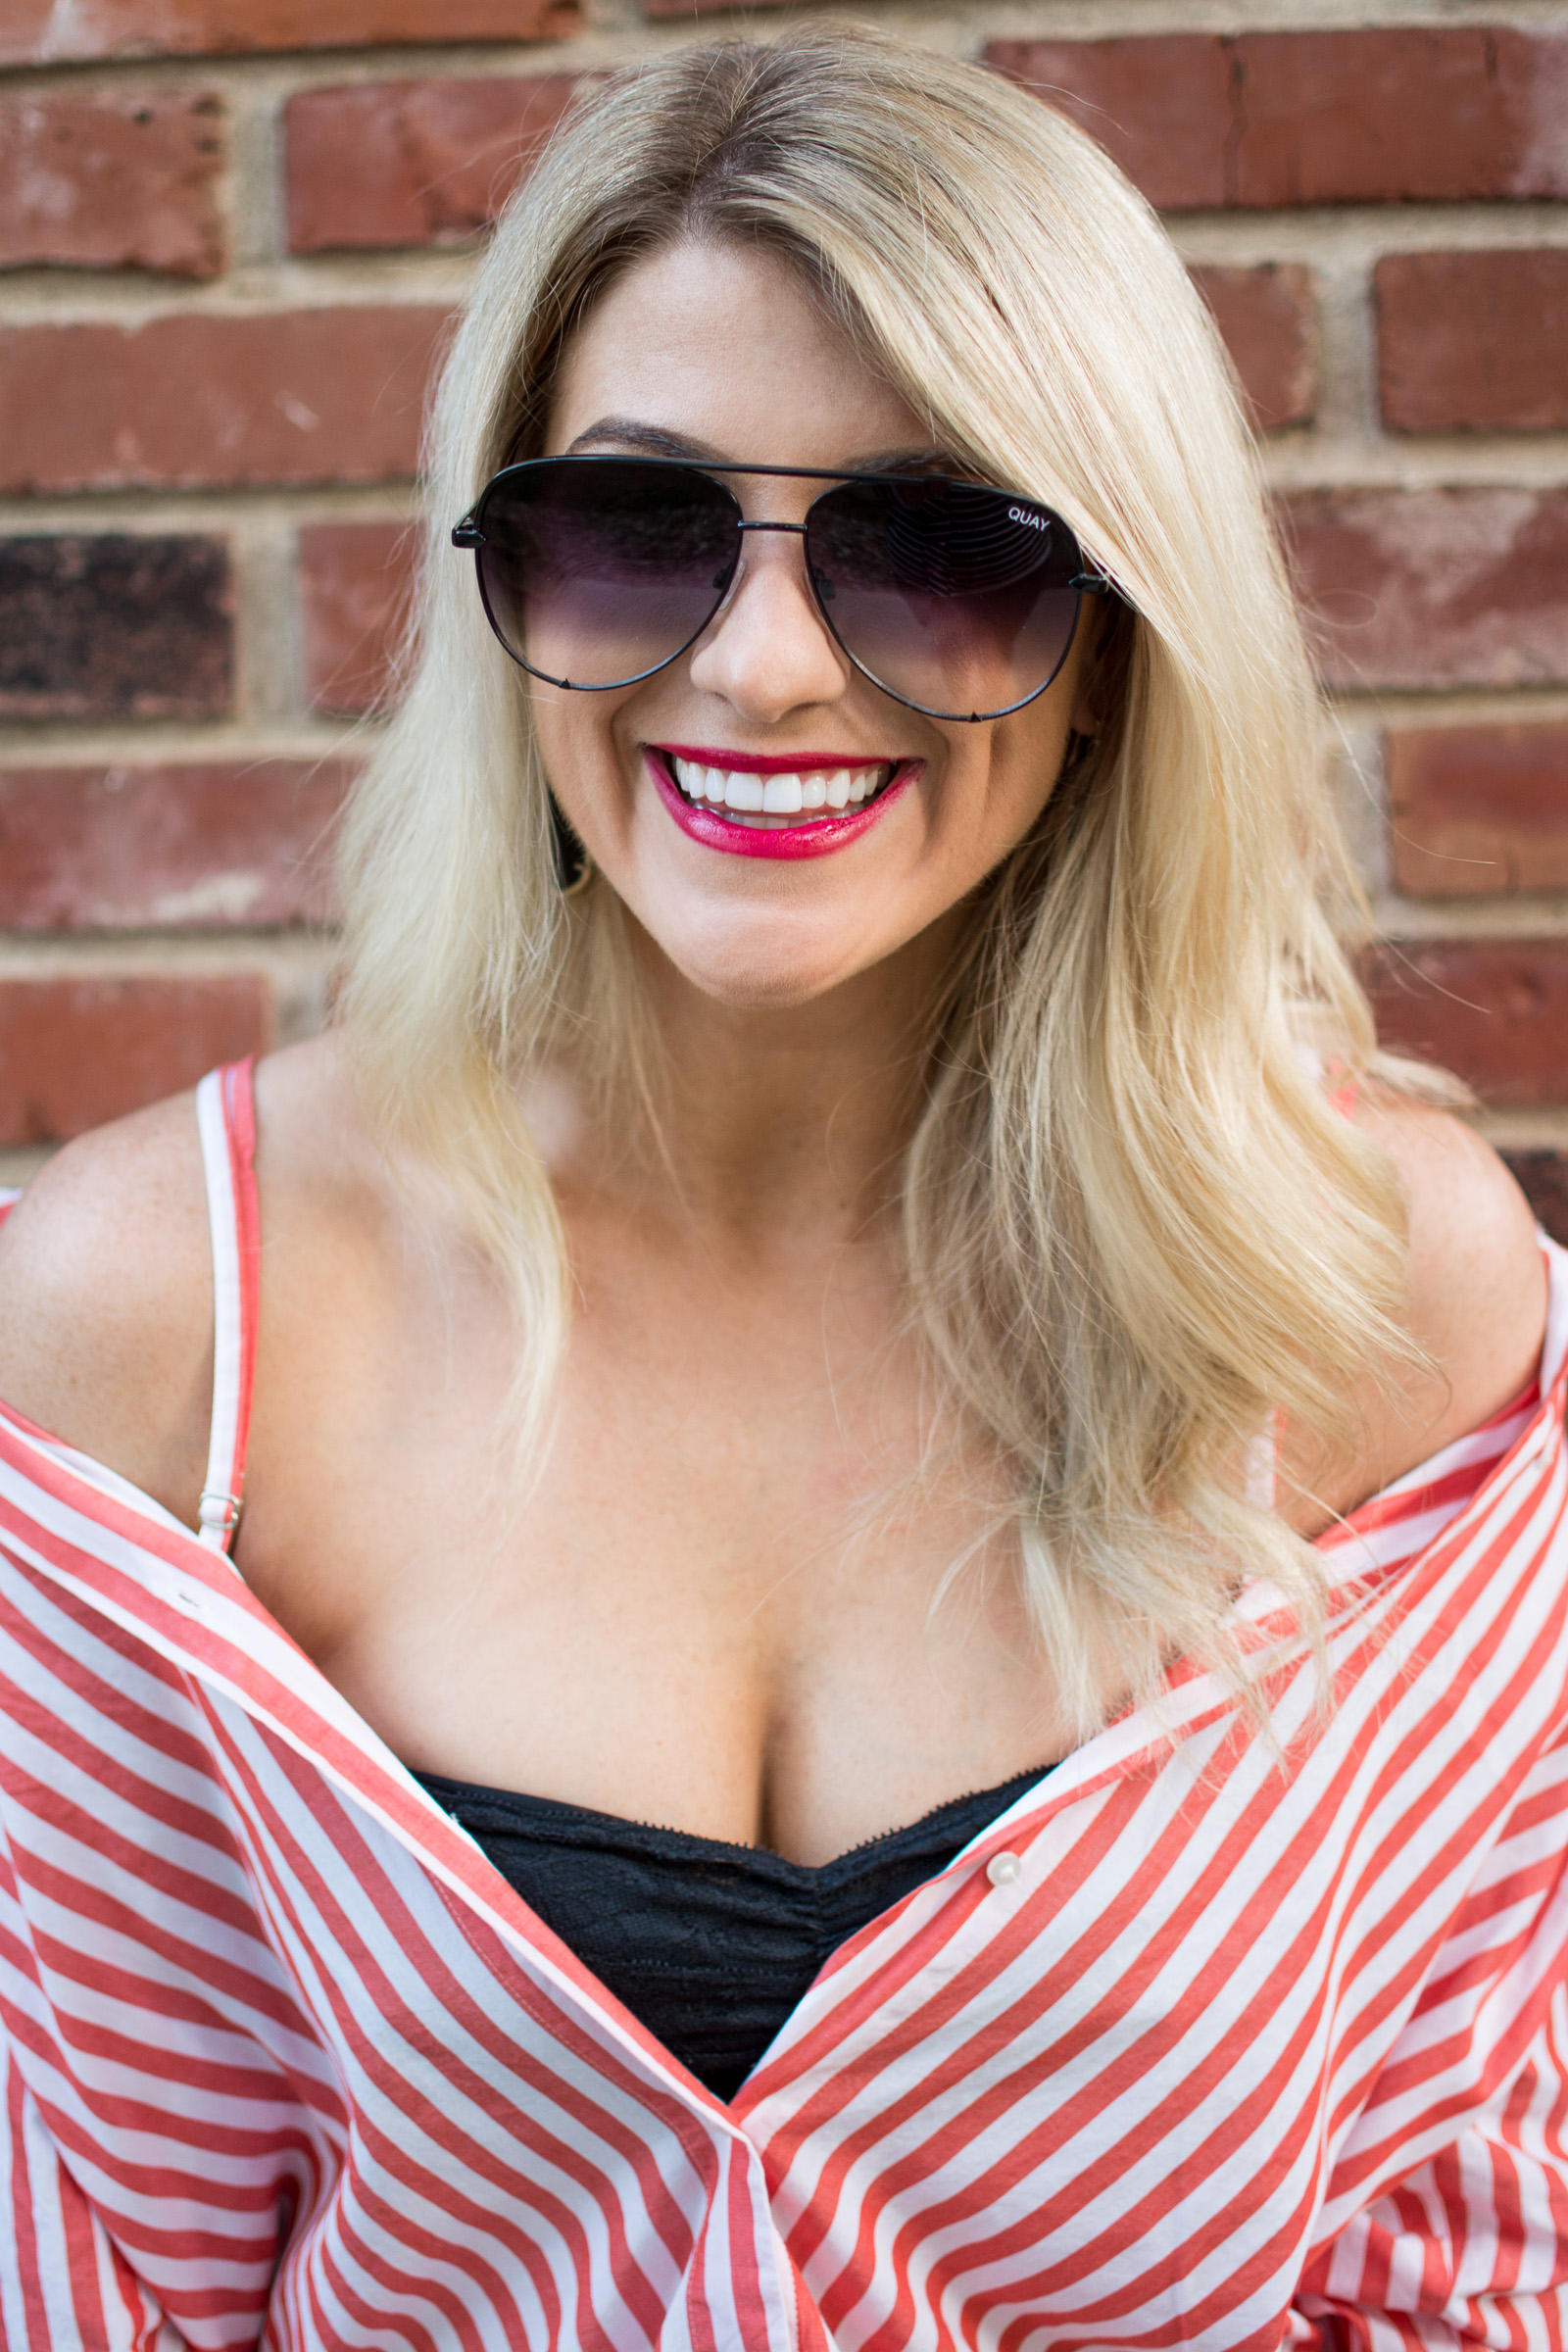 Wearing a Striped Button-up Off-the-Shoulder. | Ashley from LSR